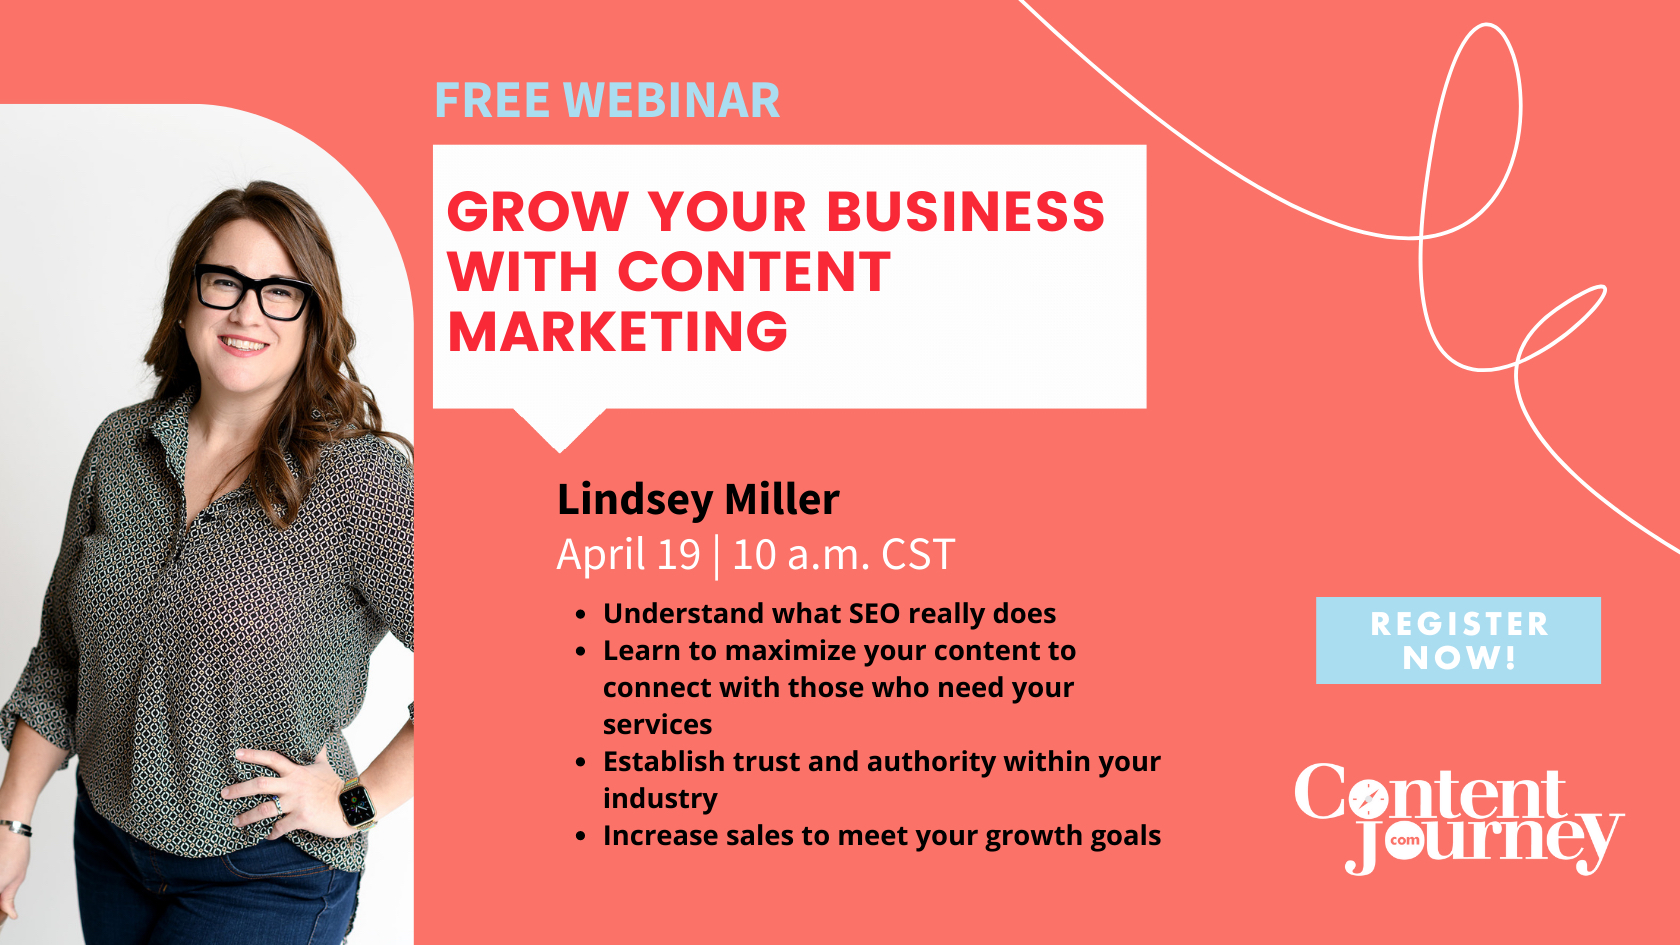 Promo for the Grow Your Business with Content Marketing webinar with Lindsey Miller.